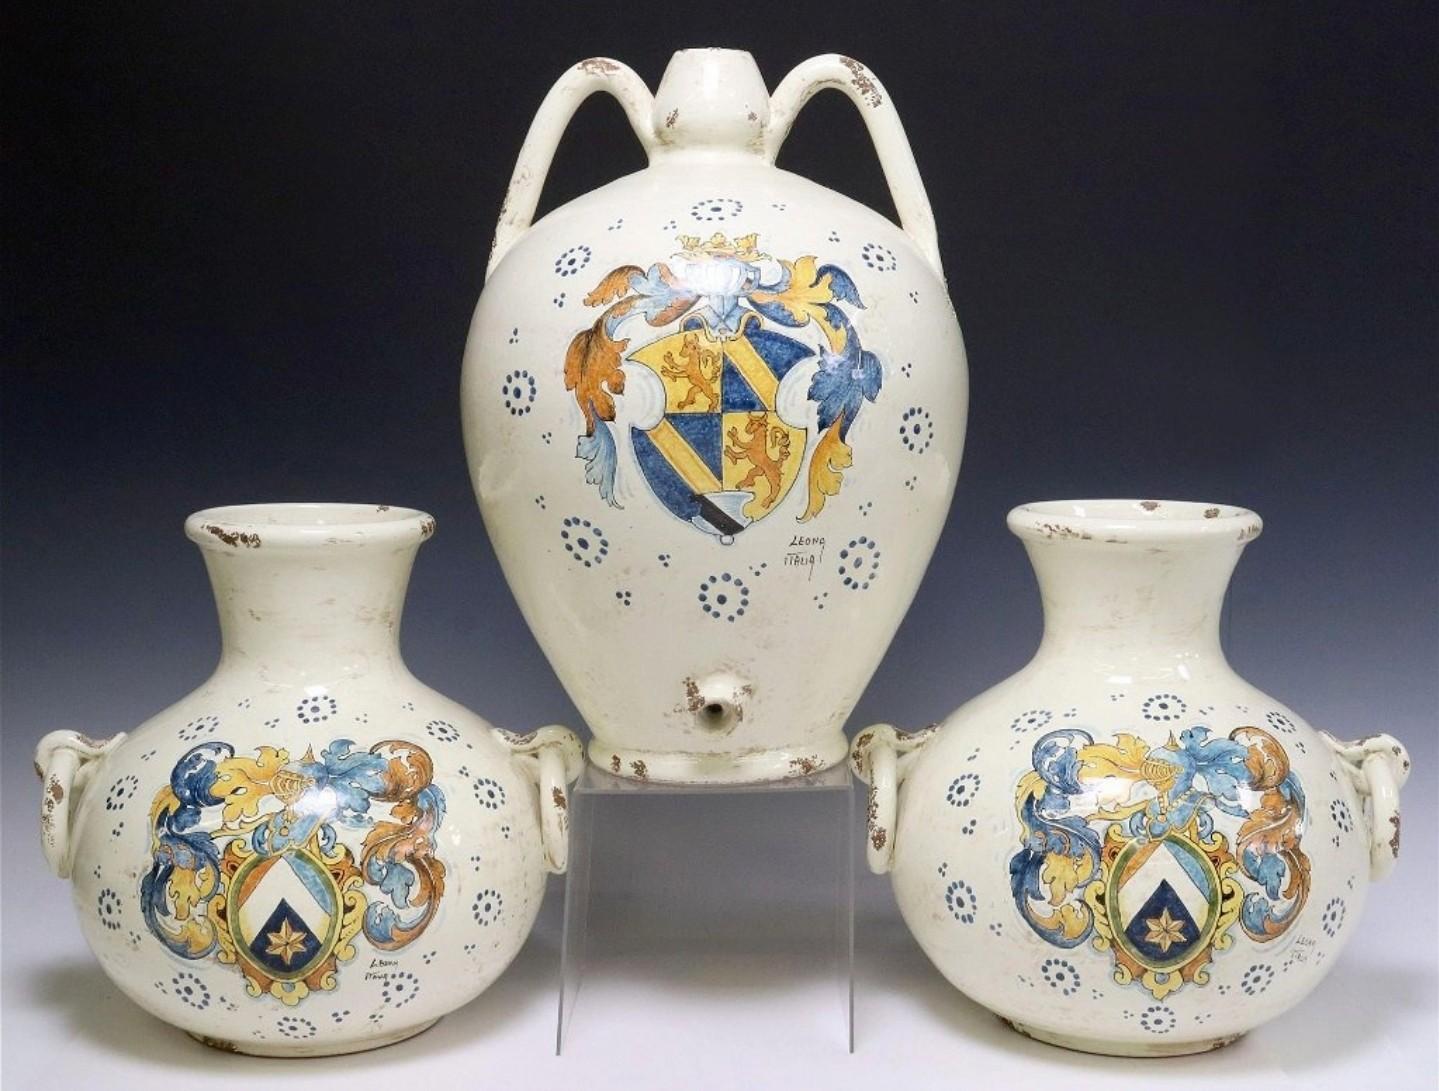 A vintage Italian majolica ceramic three piece vessel garniture set, signed Leona Italia.

Hand-crafted and hand-painted by highly skilled artisans in Tuscany, medieval Renaissance taste, each having hand painted coat of arms, varied designs, marked